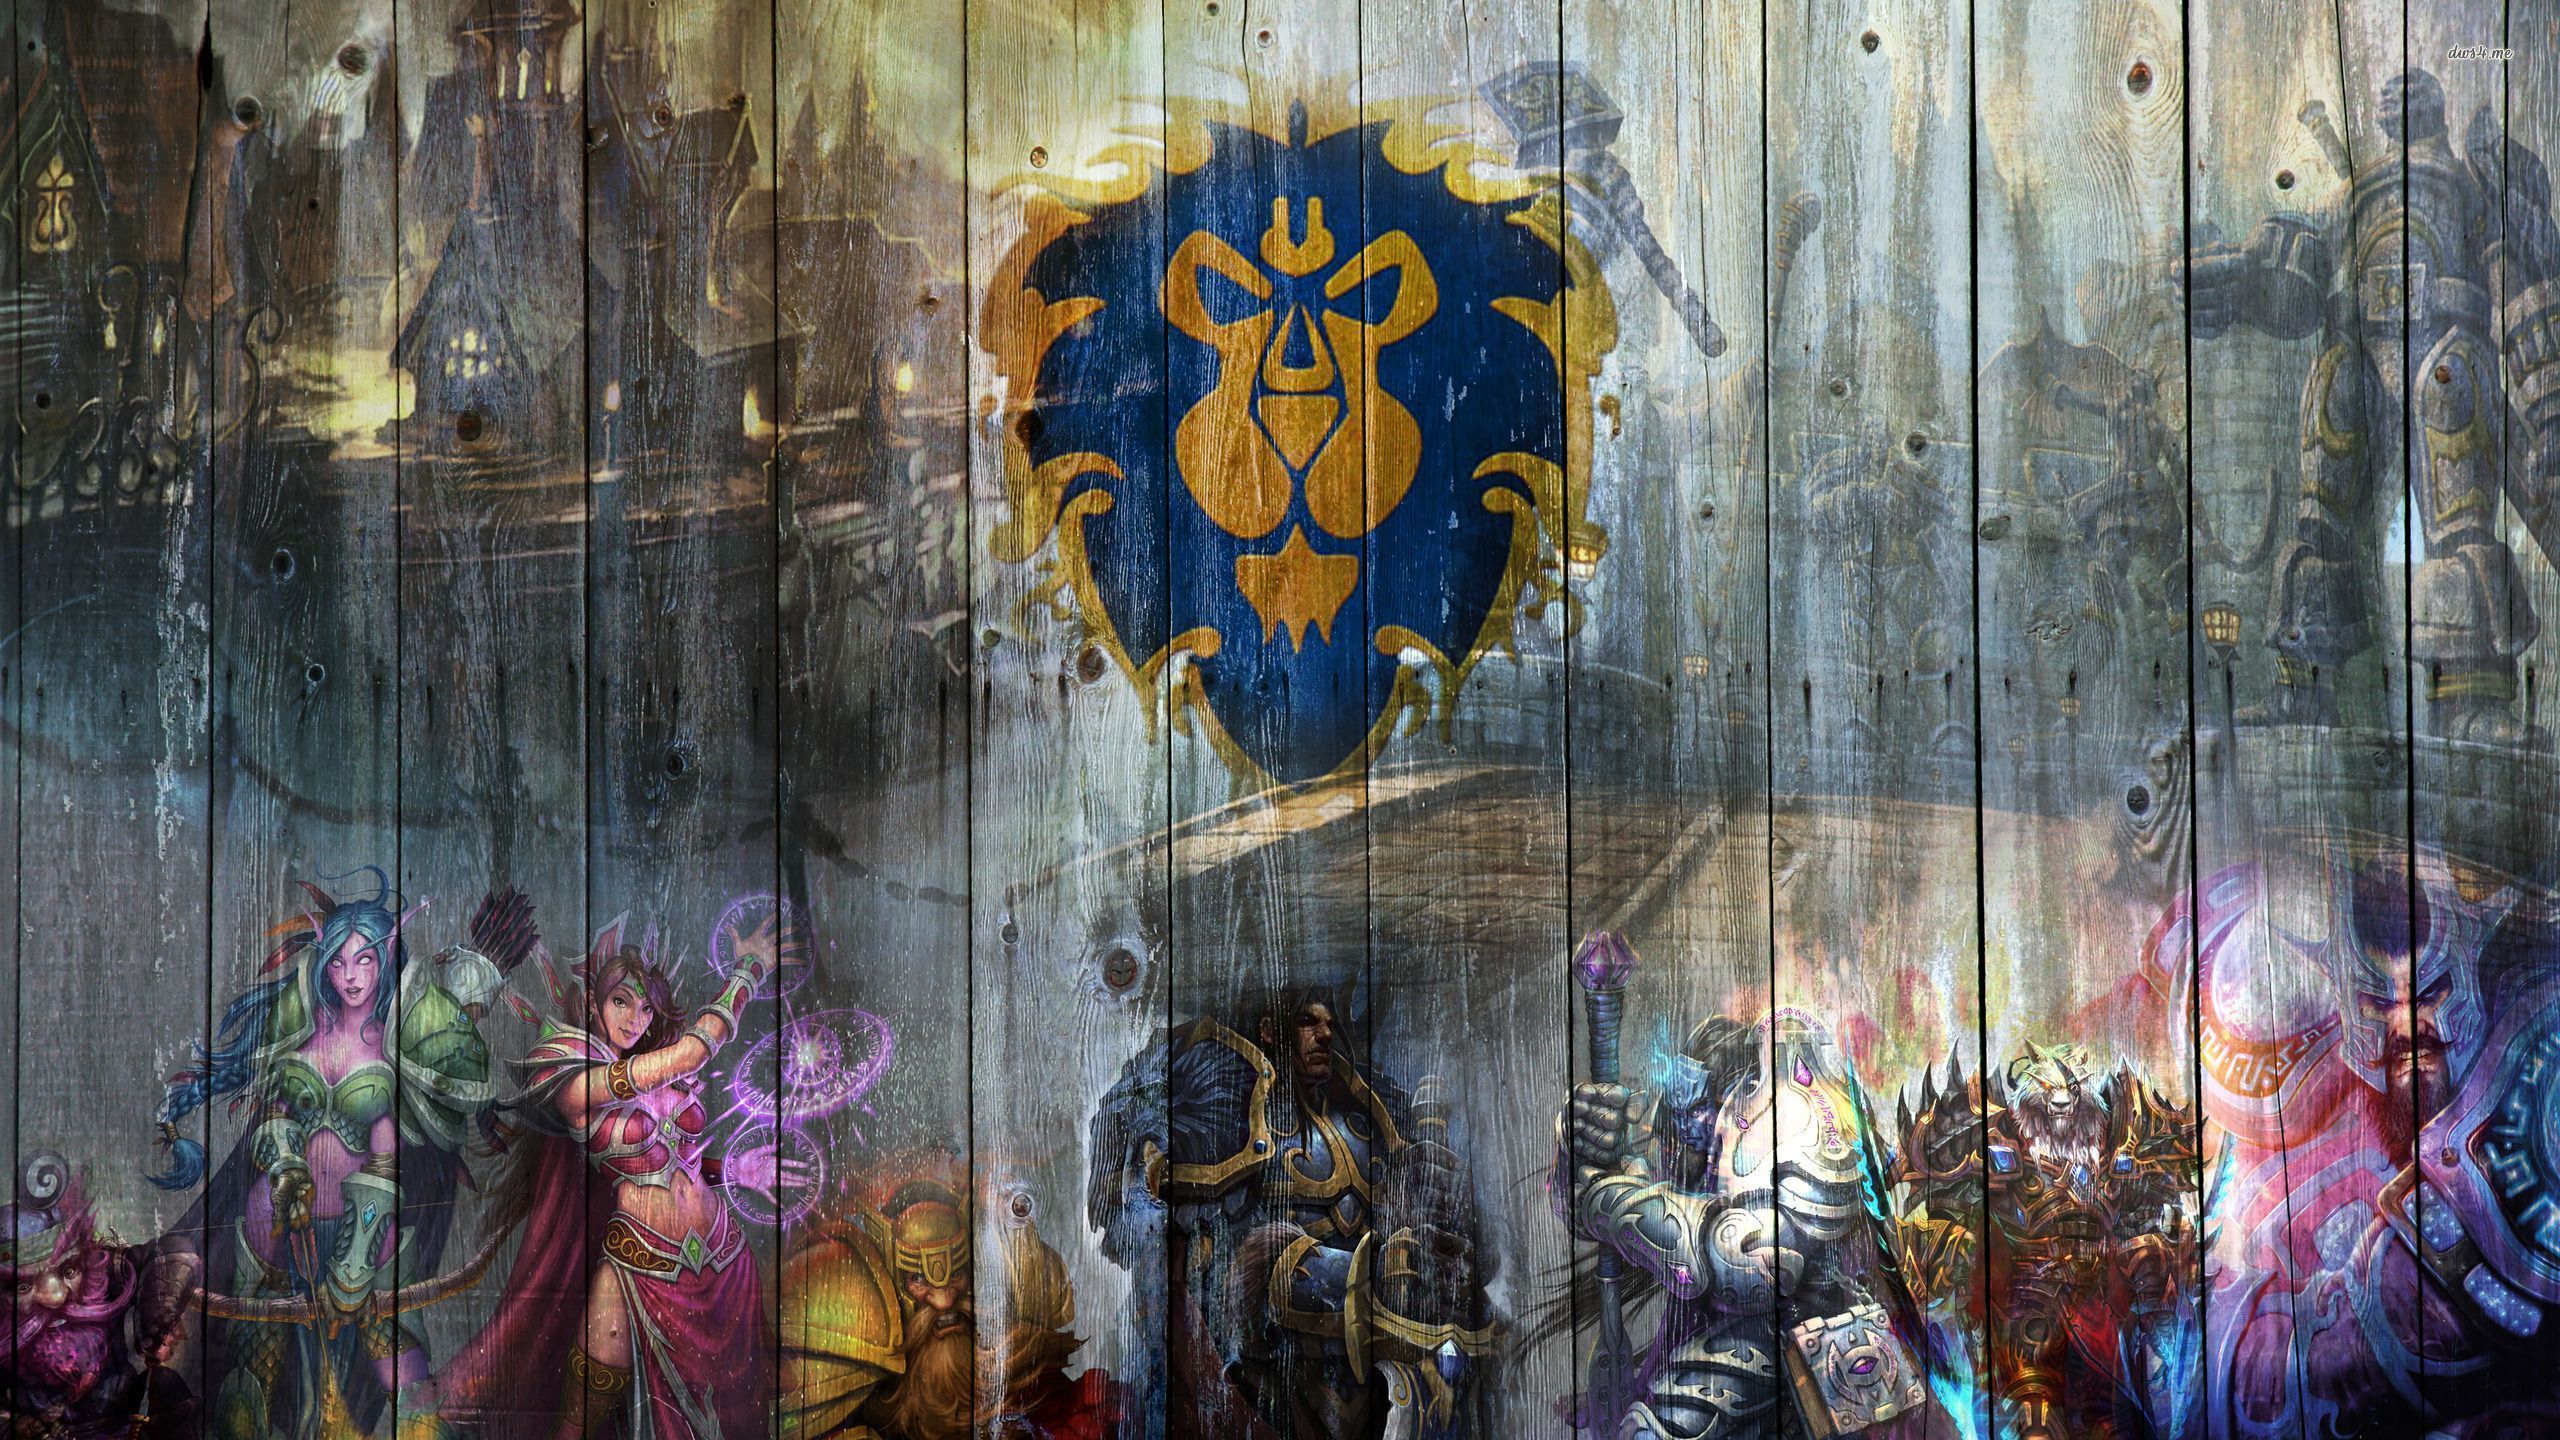 Alliance - World of Warcraft wallpaper - Game wallpapers -